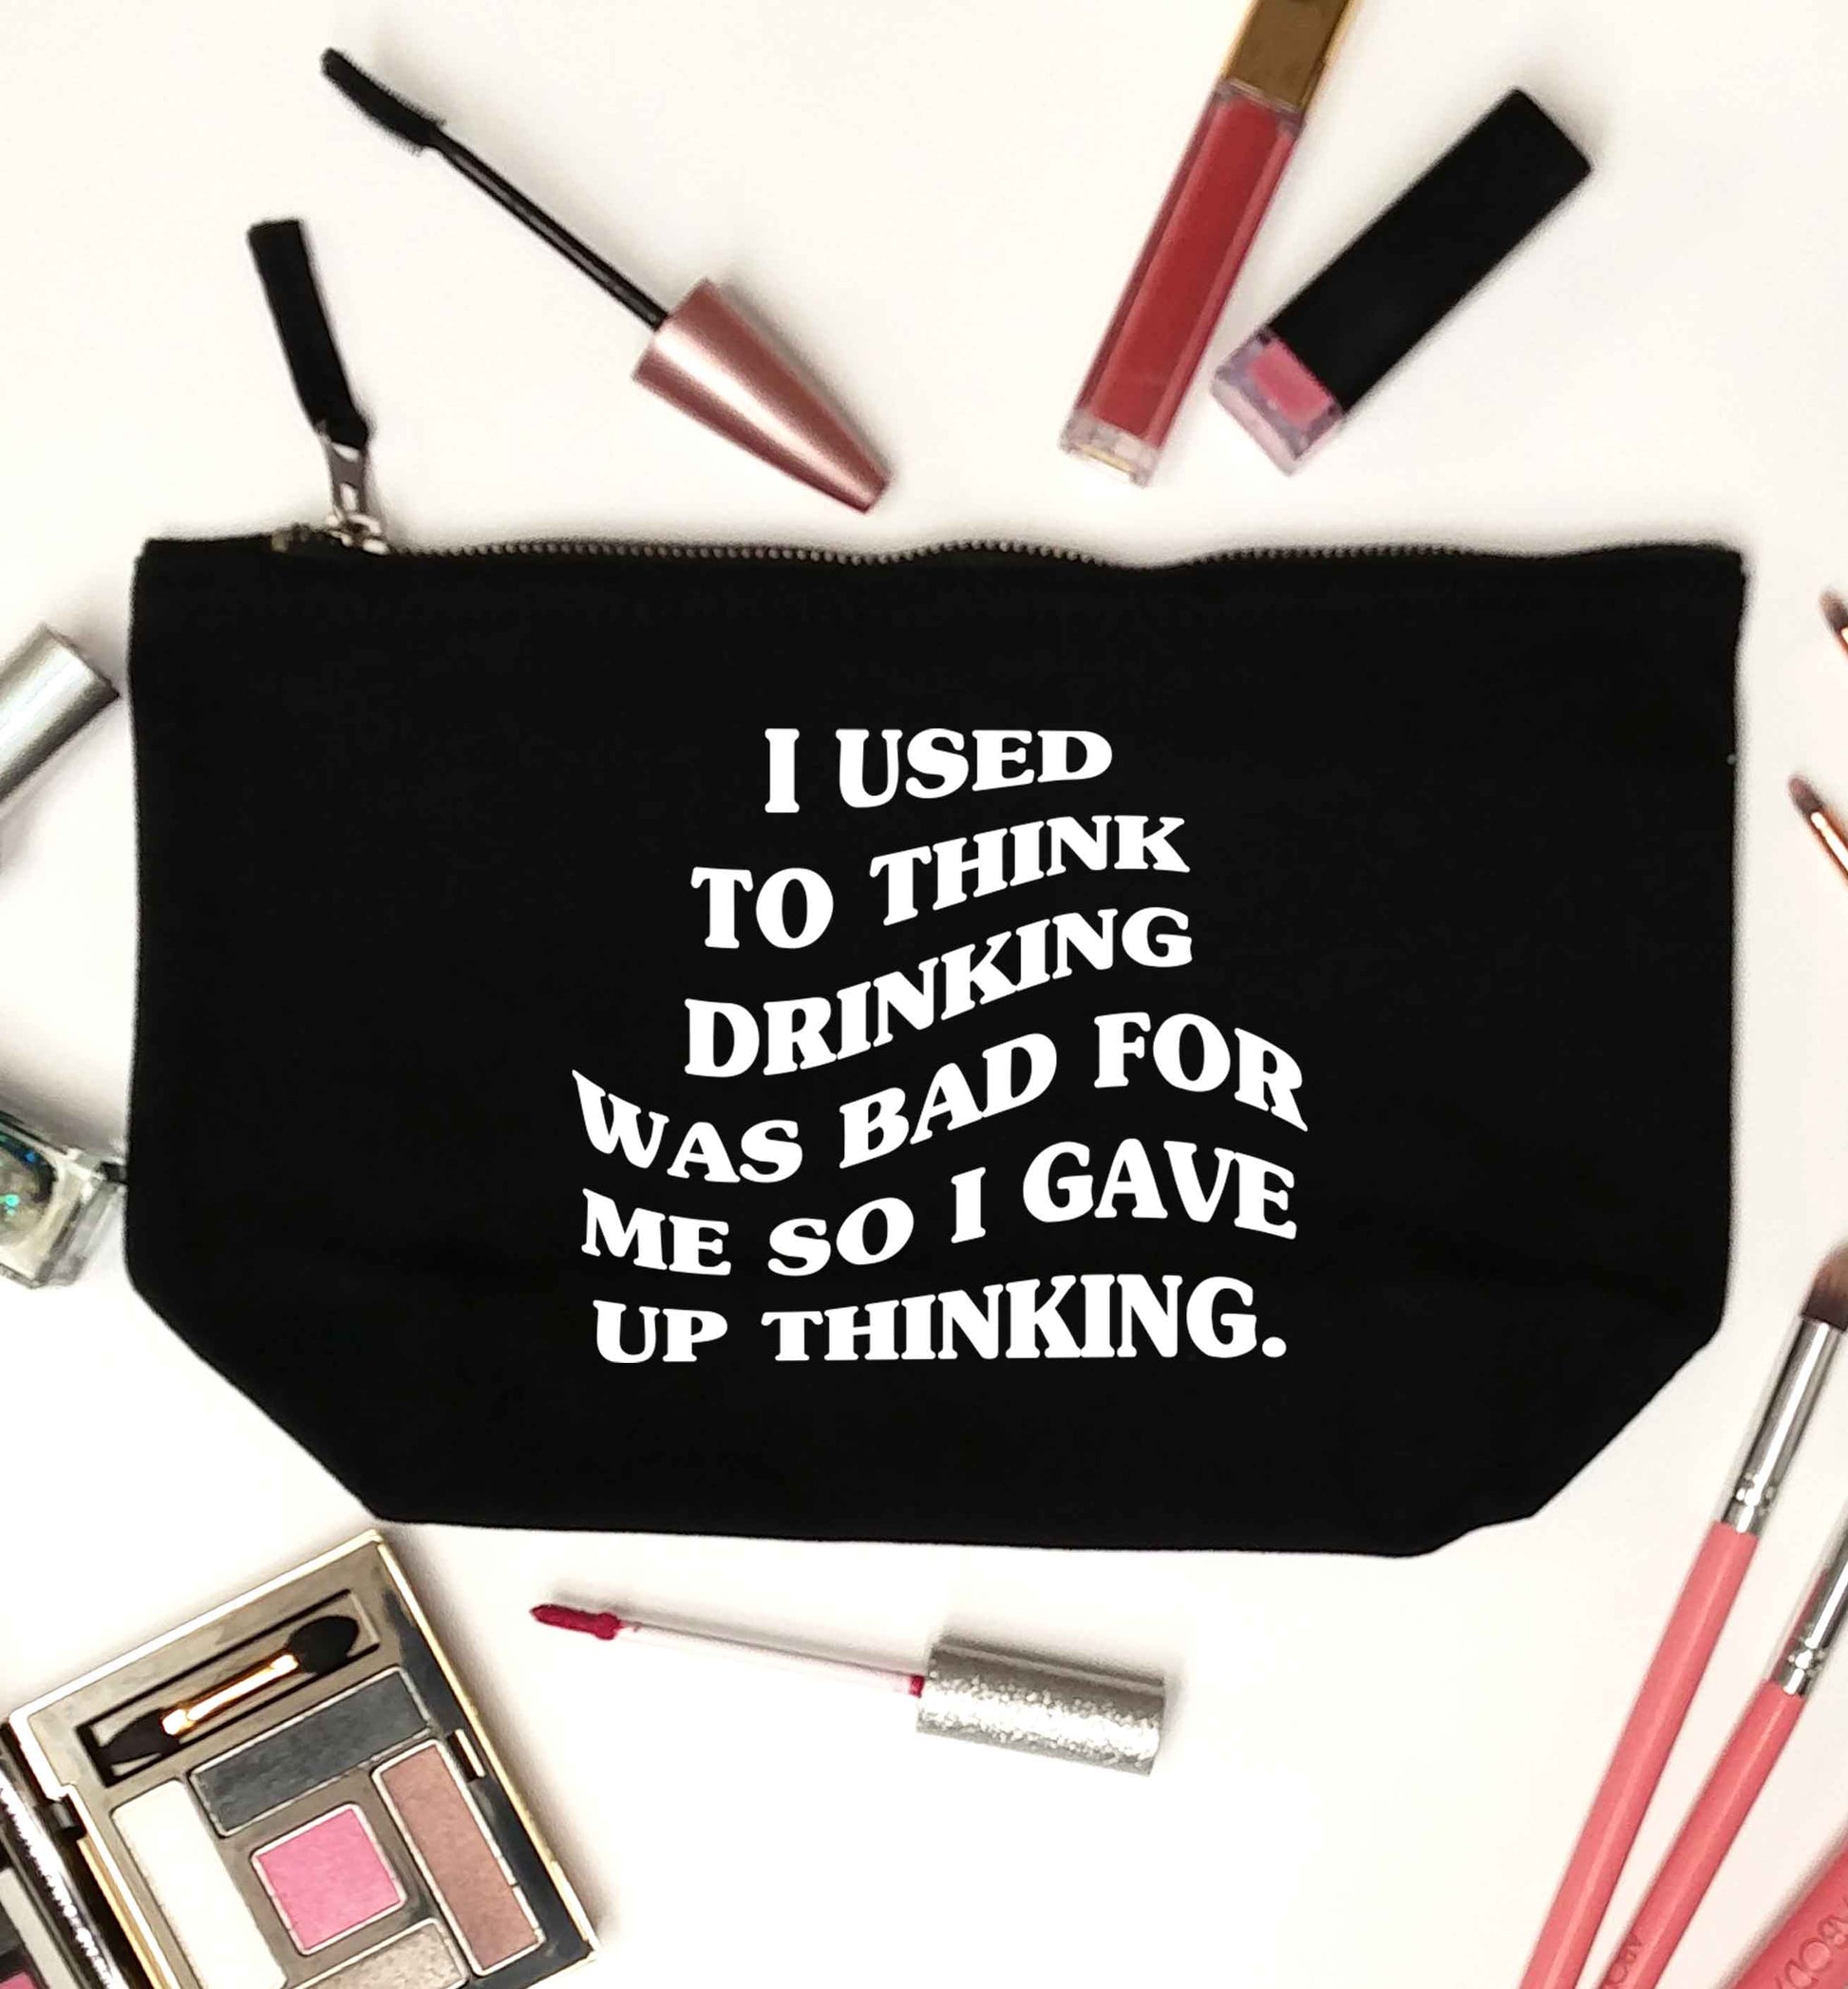 I used to think drinking was bad so I gave up thinking black makeup bag